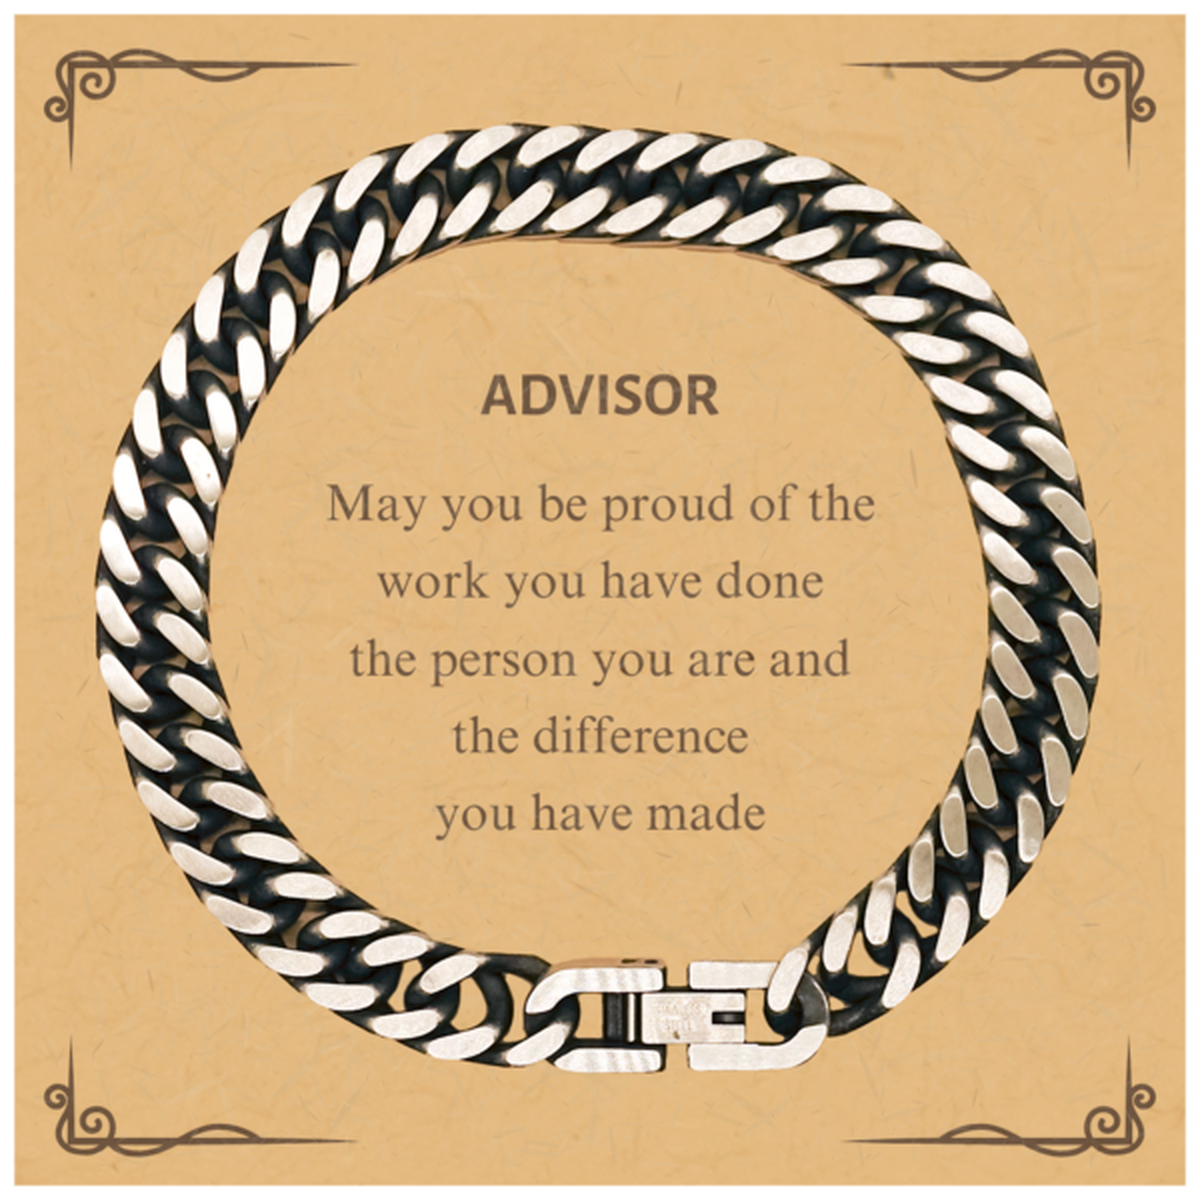 Advisor May you be proud of the work you have done, Retirement Advisor Cuban Link Chain Bracelet for Colleague Appreciation Gifts Amazing for Advisor